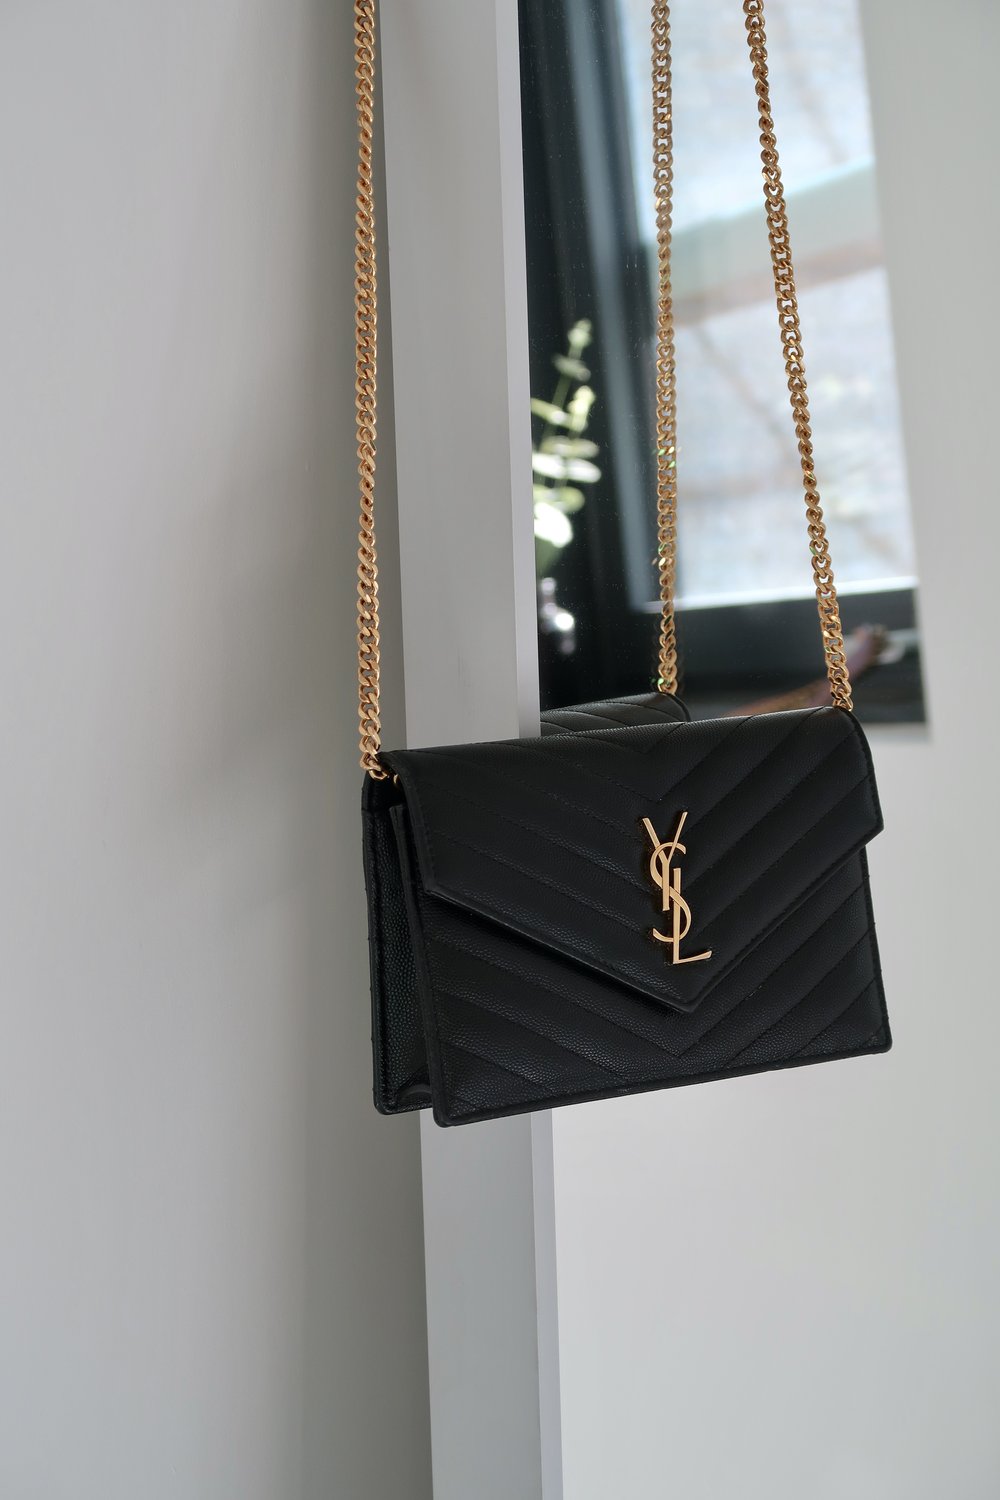 ysl wallet on a chain